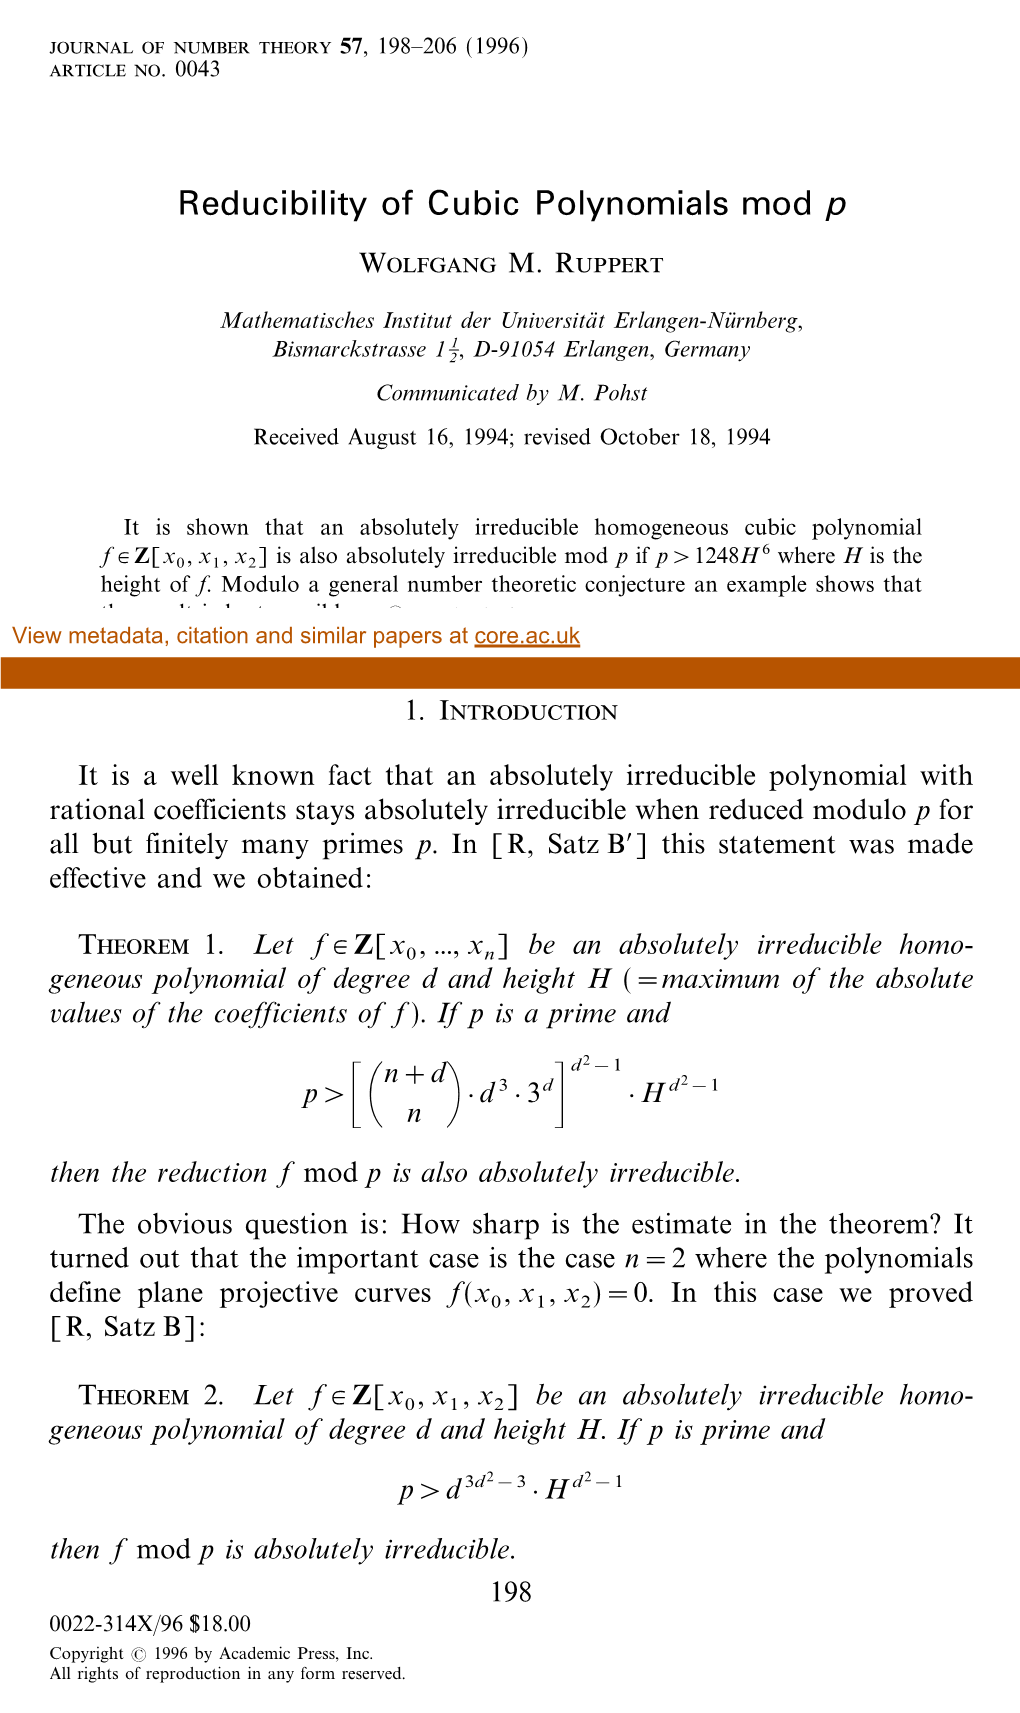 Reducibility of Cubic Polynomials Mod P Wolfgang M